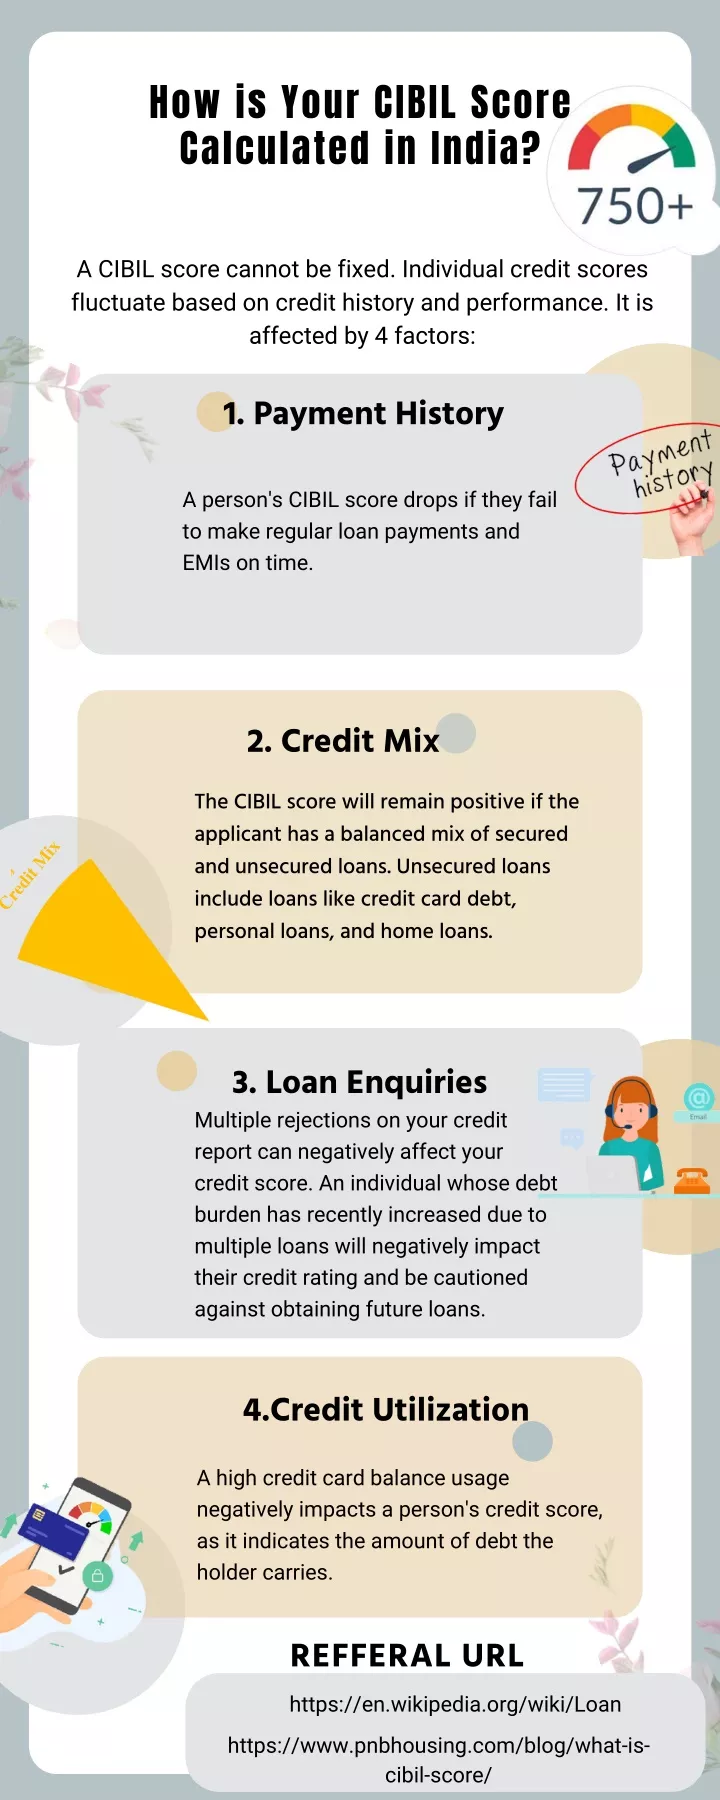 how is your cibil score calculated in india